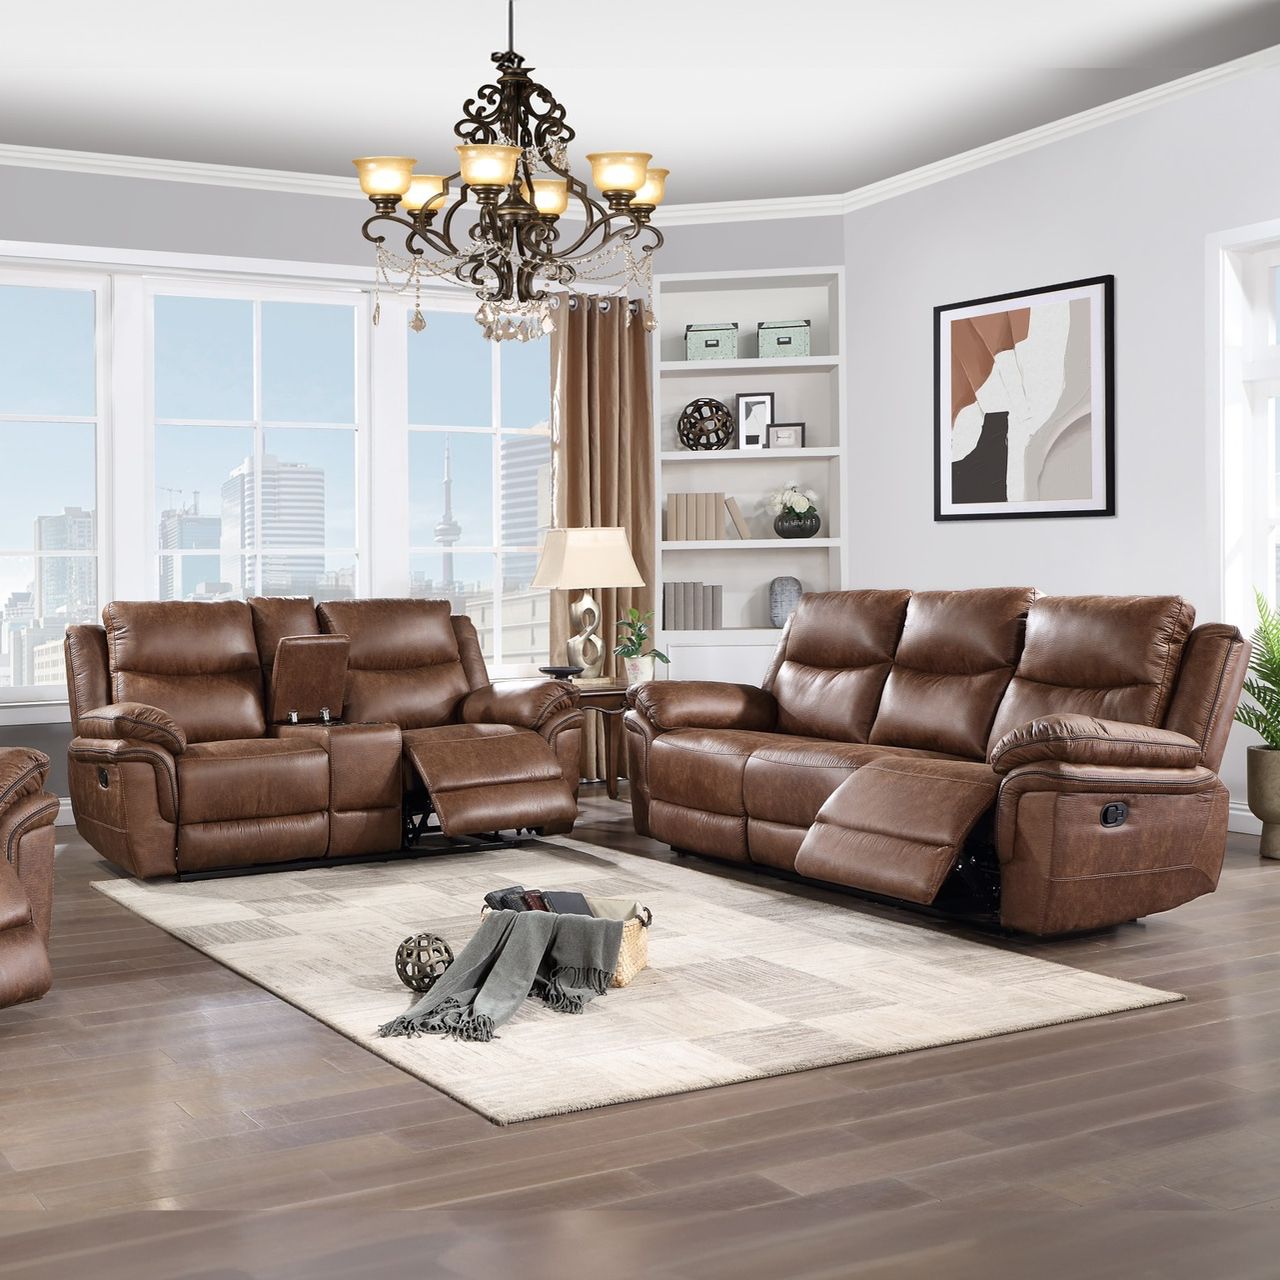 Dual Recliner Motion Sofa And Loveseat In Brown Fabric